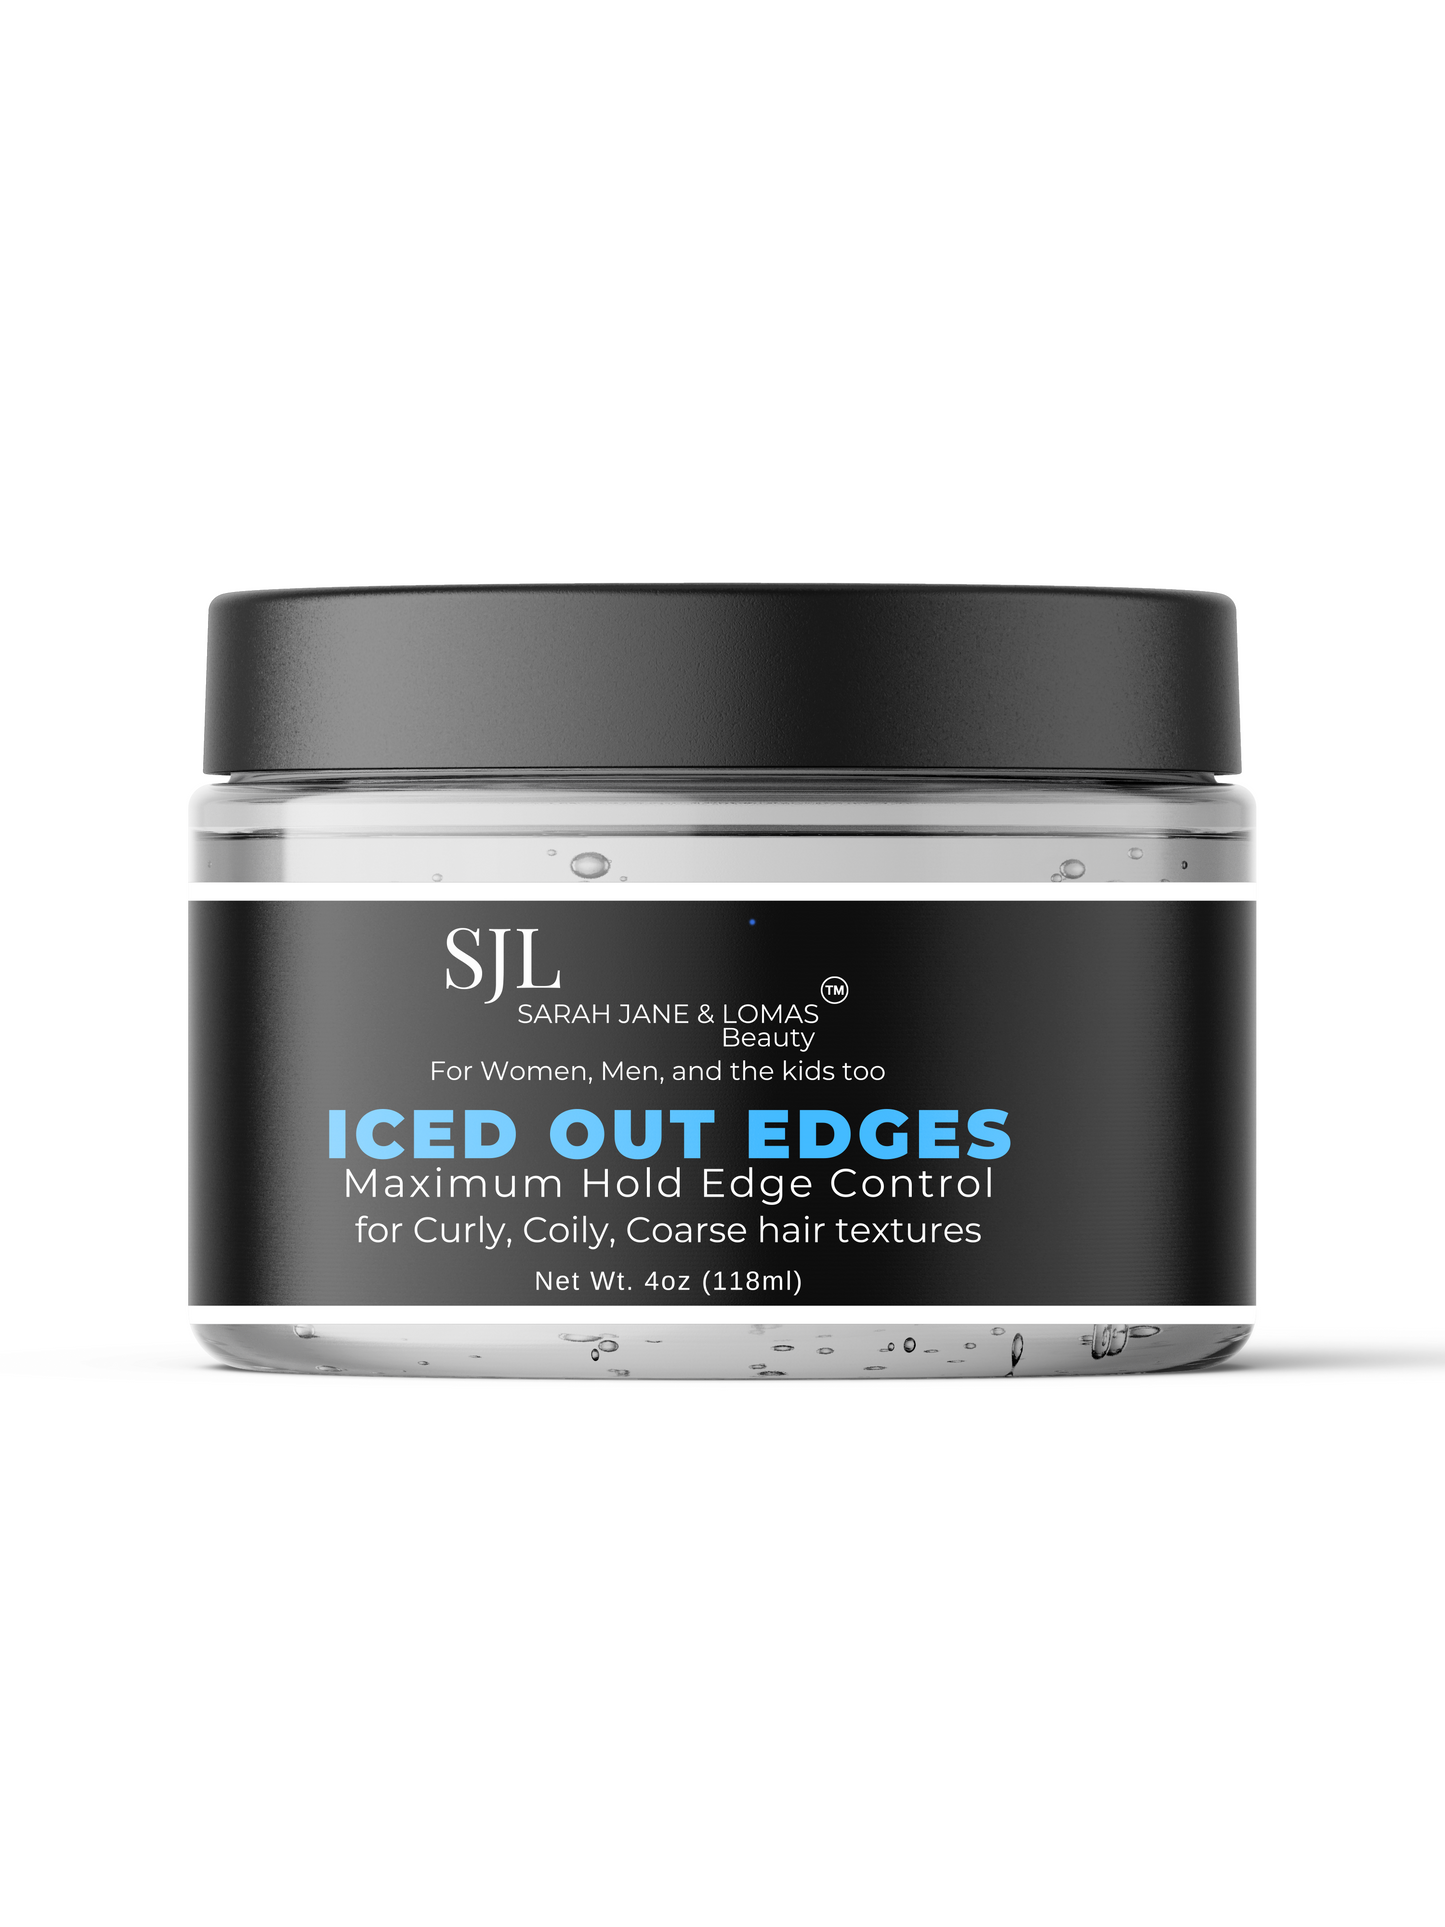 SJL Iced Out Edges, Maximum Hold Edge Control, Fragrance Free